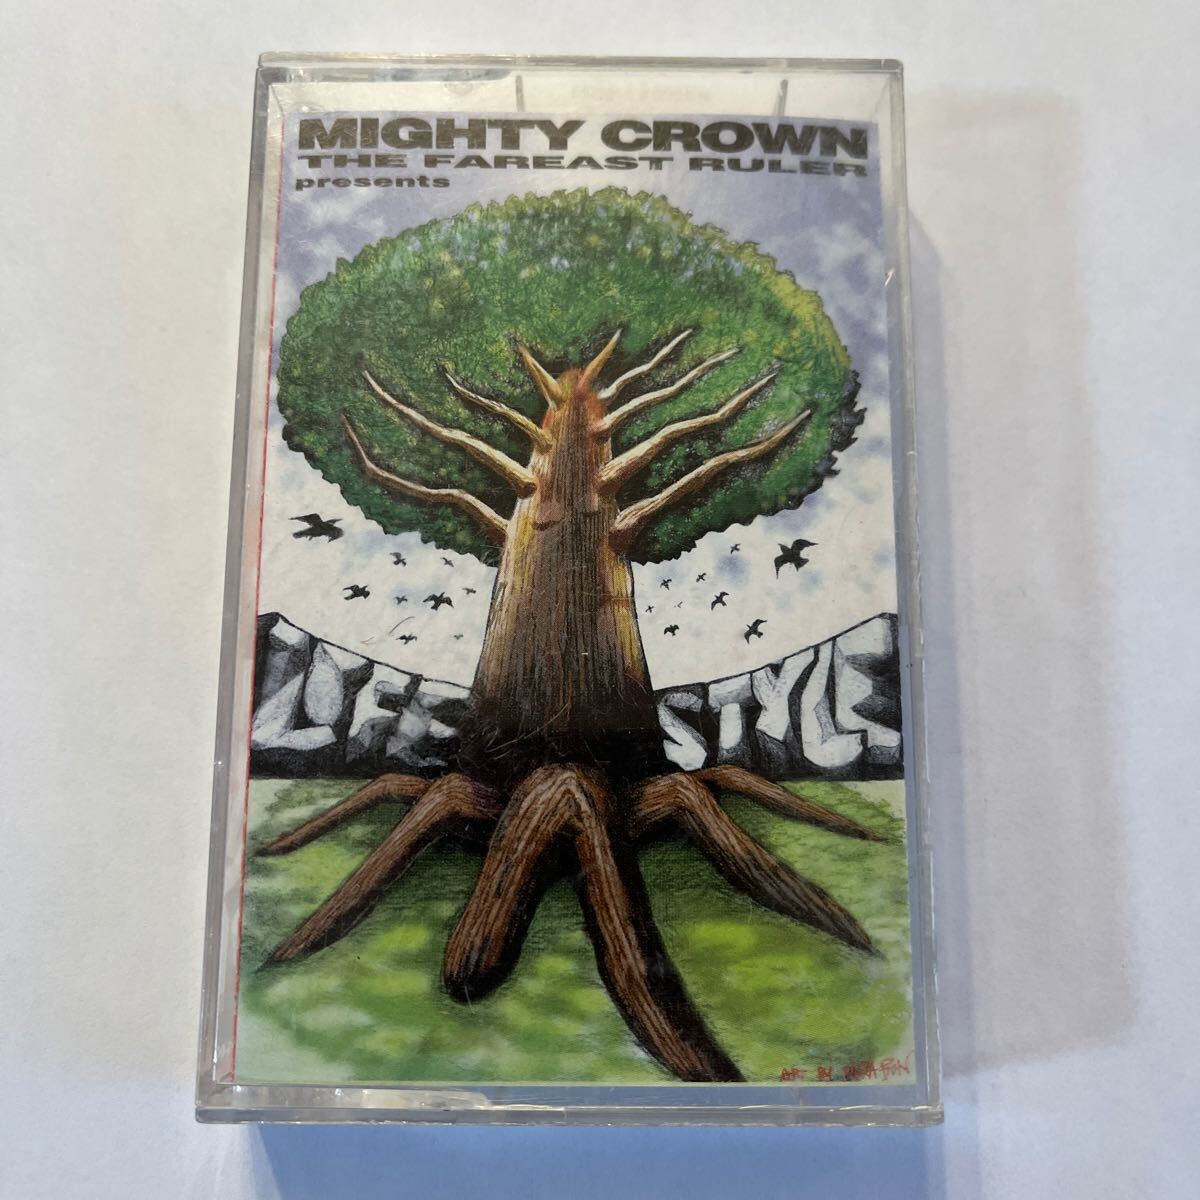  cassette tape MIGHTY CROWN PRESENTS LIFE STYLE / JAPANESE REGGAE / MIX TAPE